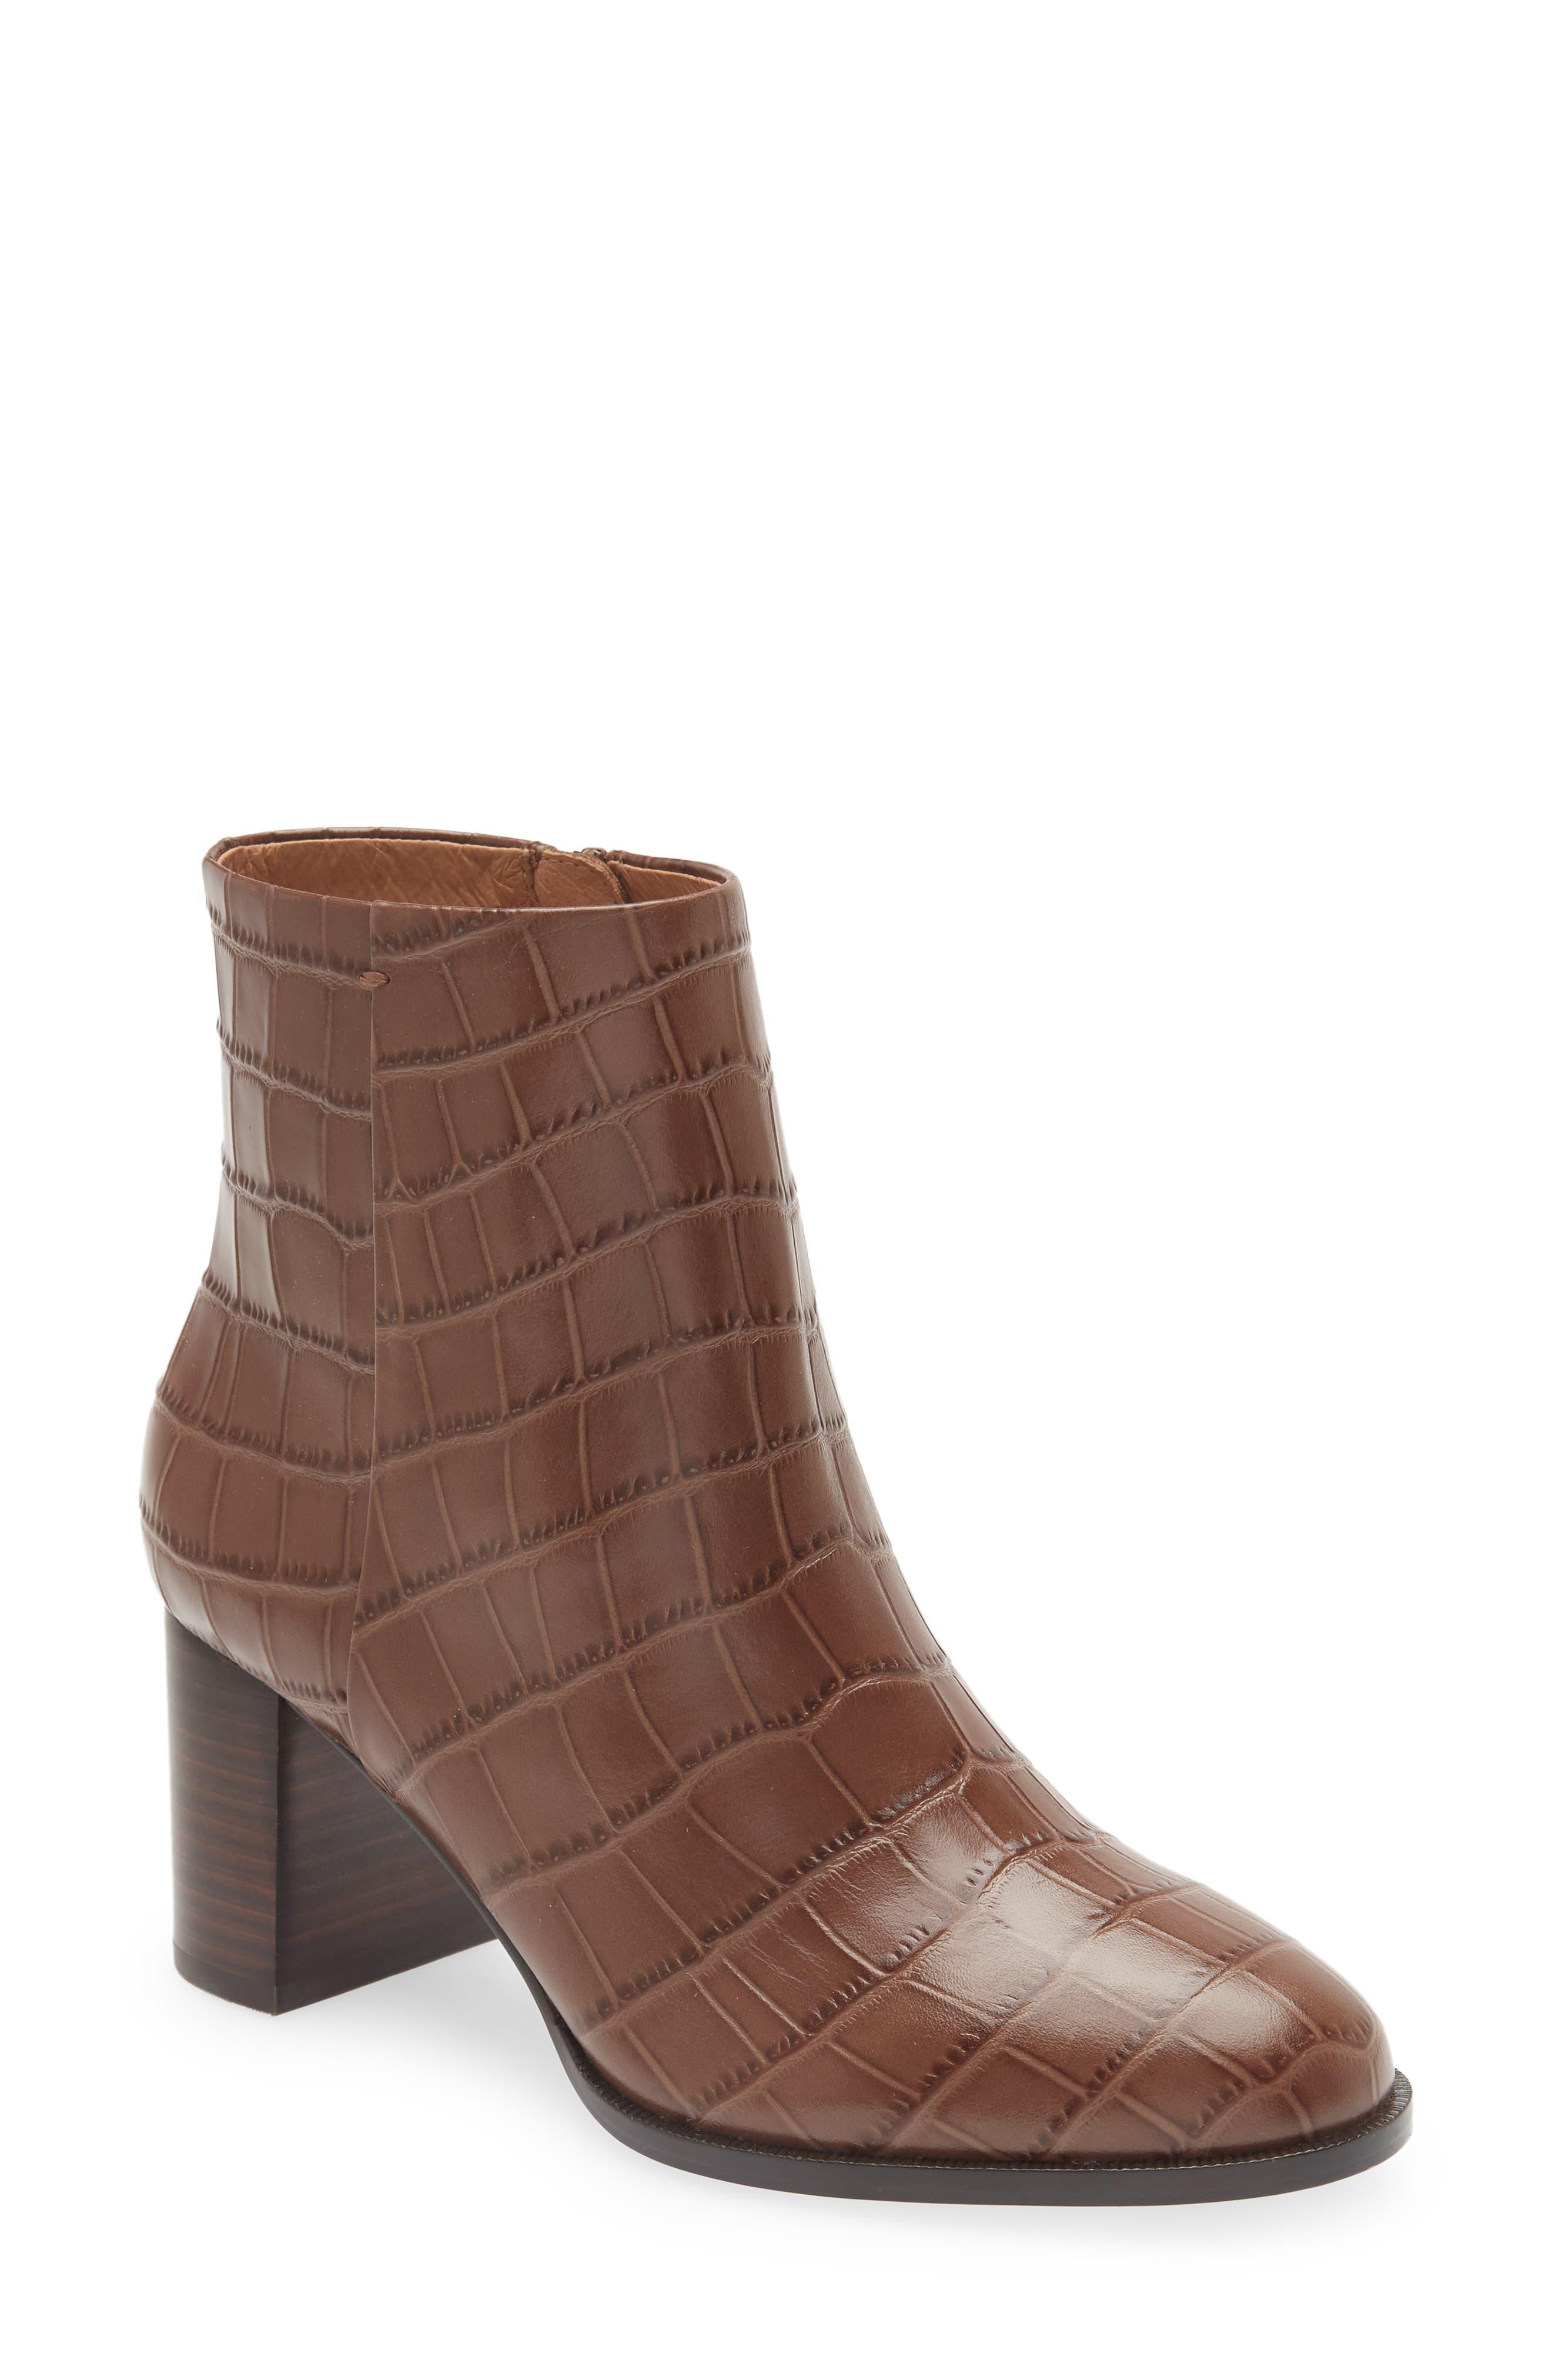 Madewell The Mira Side Seam Croc Embossed Bootie in Brown | Lyst